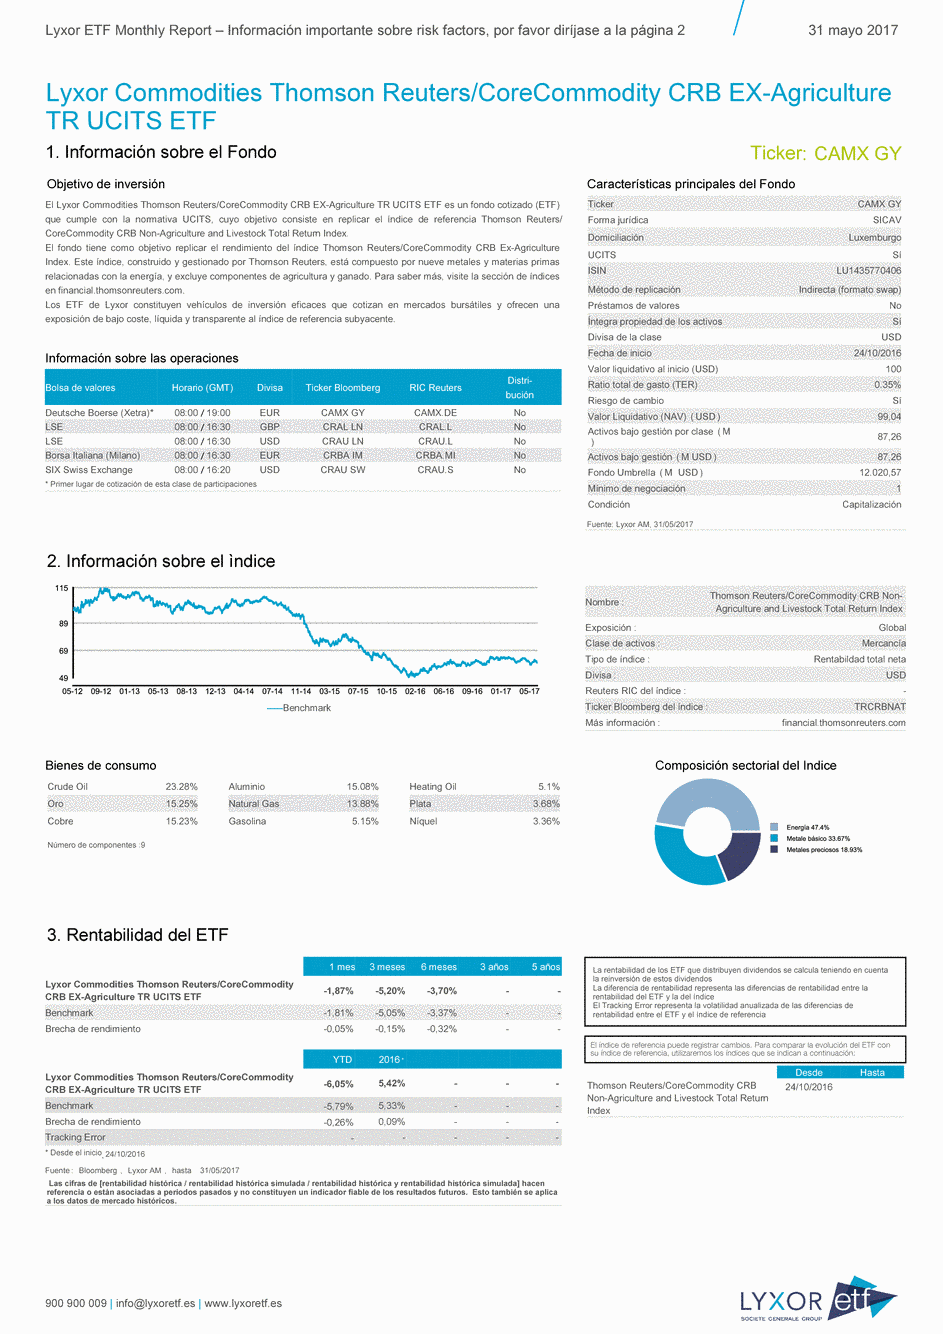 Reporting Lyxor Commodities Thomson Reuters/CoreCommodity CRB EX-Agriculture TR UCITS ETF - Acc - 31/05/2017 - Espagnol